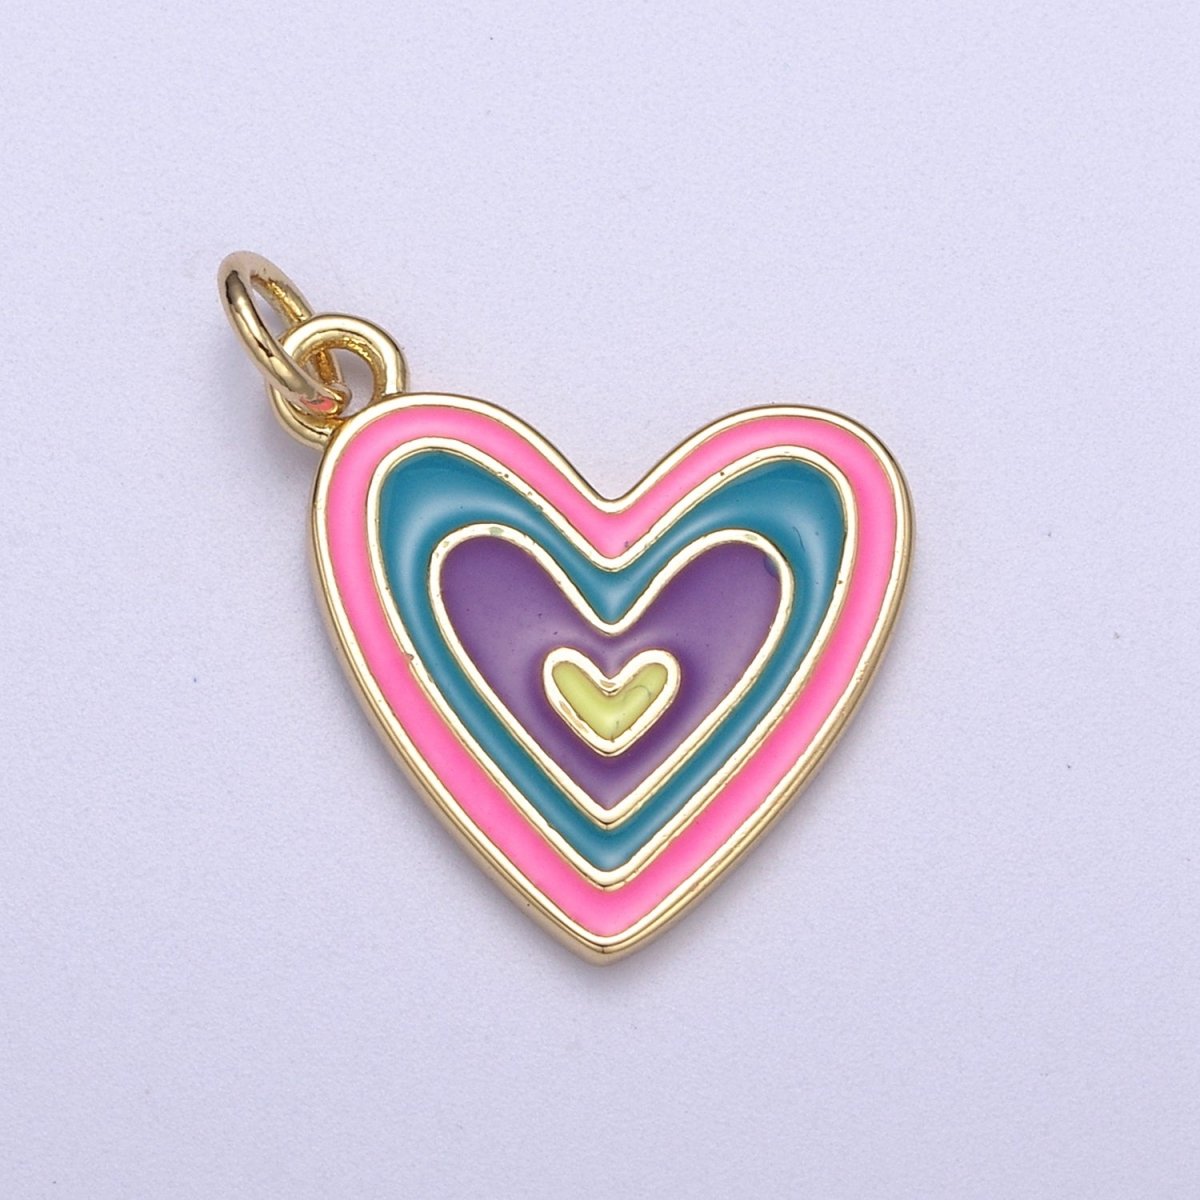 14k Gold Filled Pink Enamel Layer Heart Charm Add on Pendant Colorful Love Jewelry for Valentine Day N-304 N-305 - DLUXCA